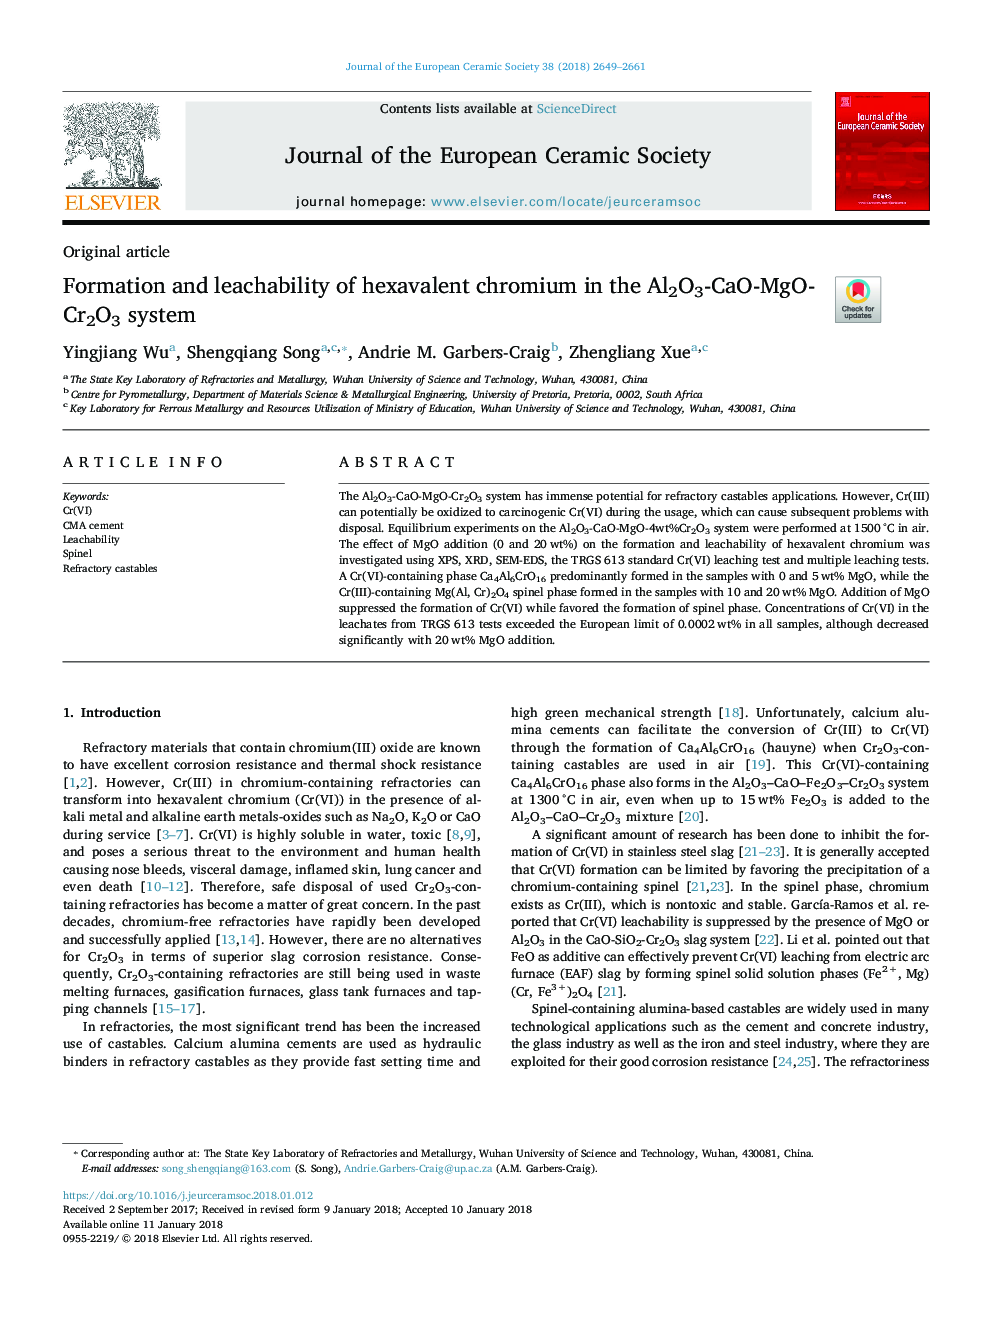 Formation and leachability of hexavalent chromium in the Al2O3-CaO-MgO-Cr2O3 system